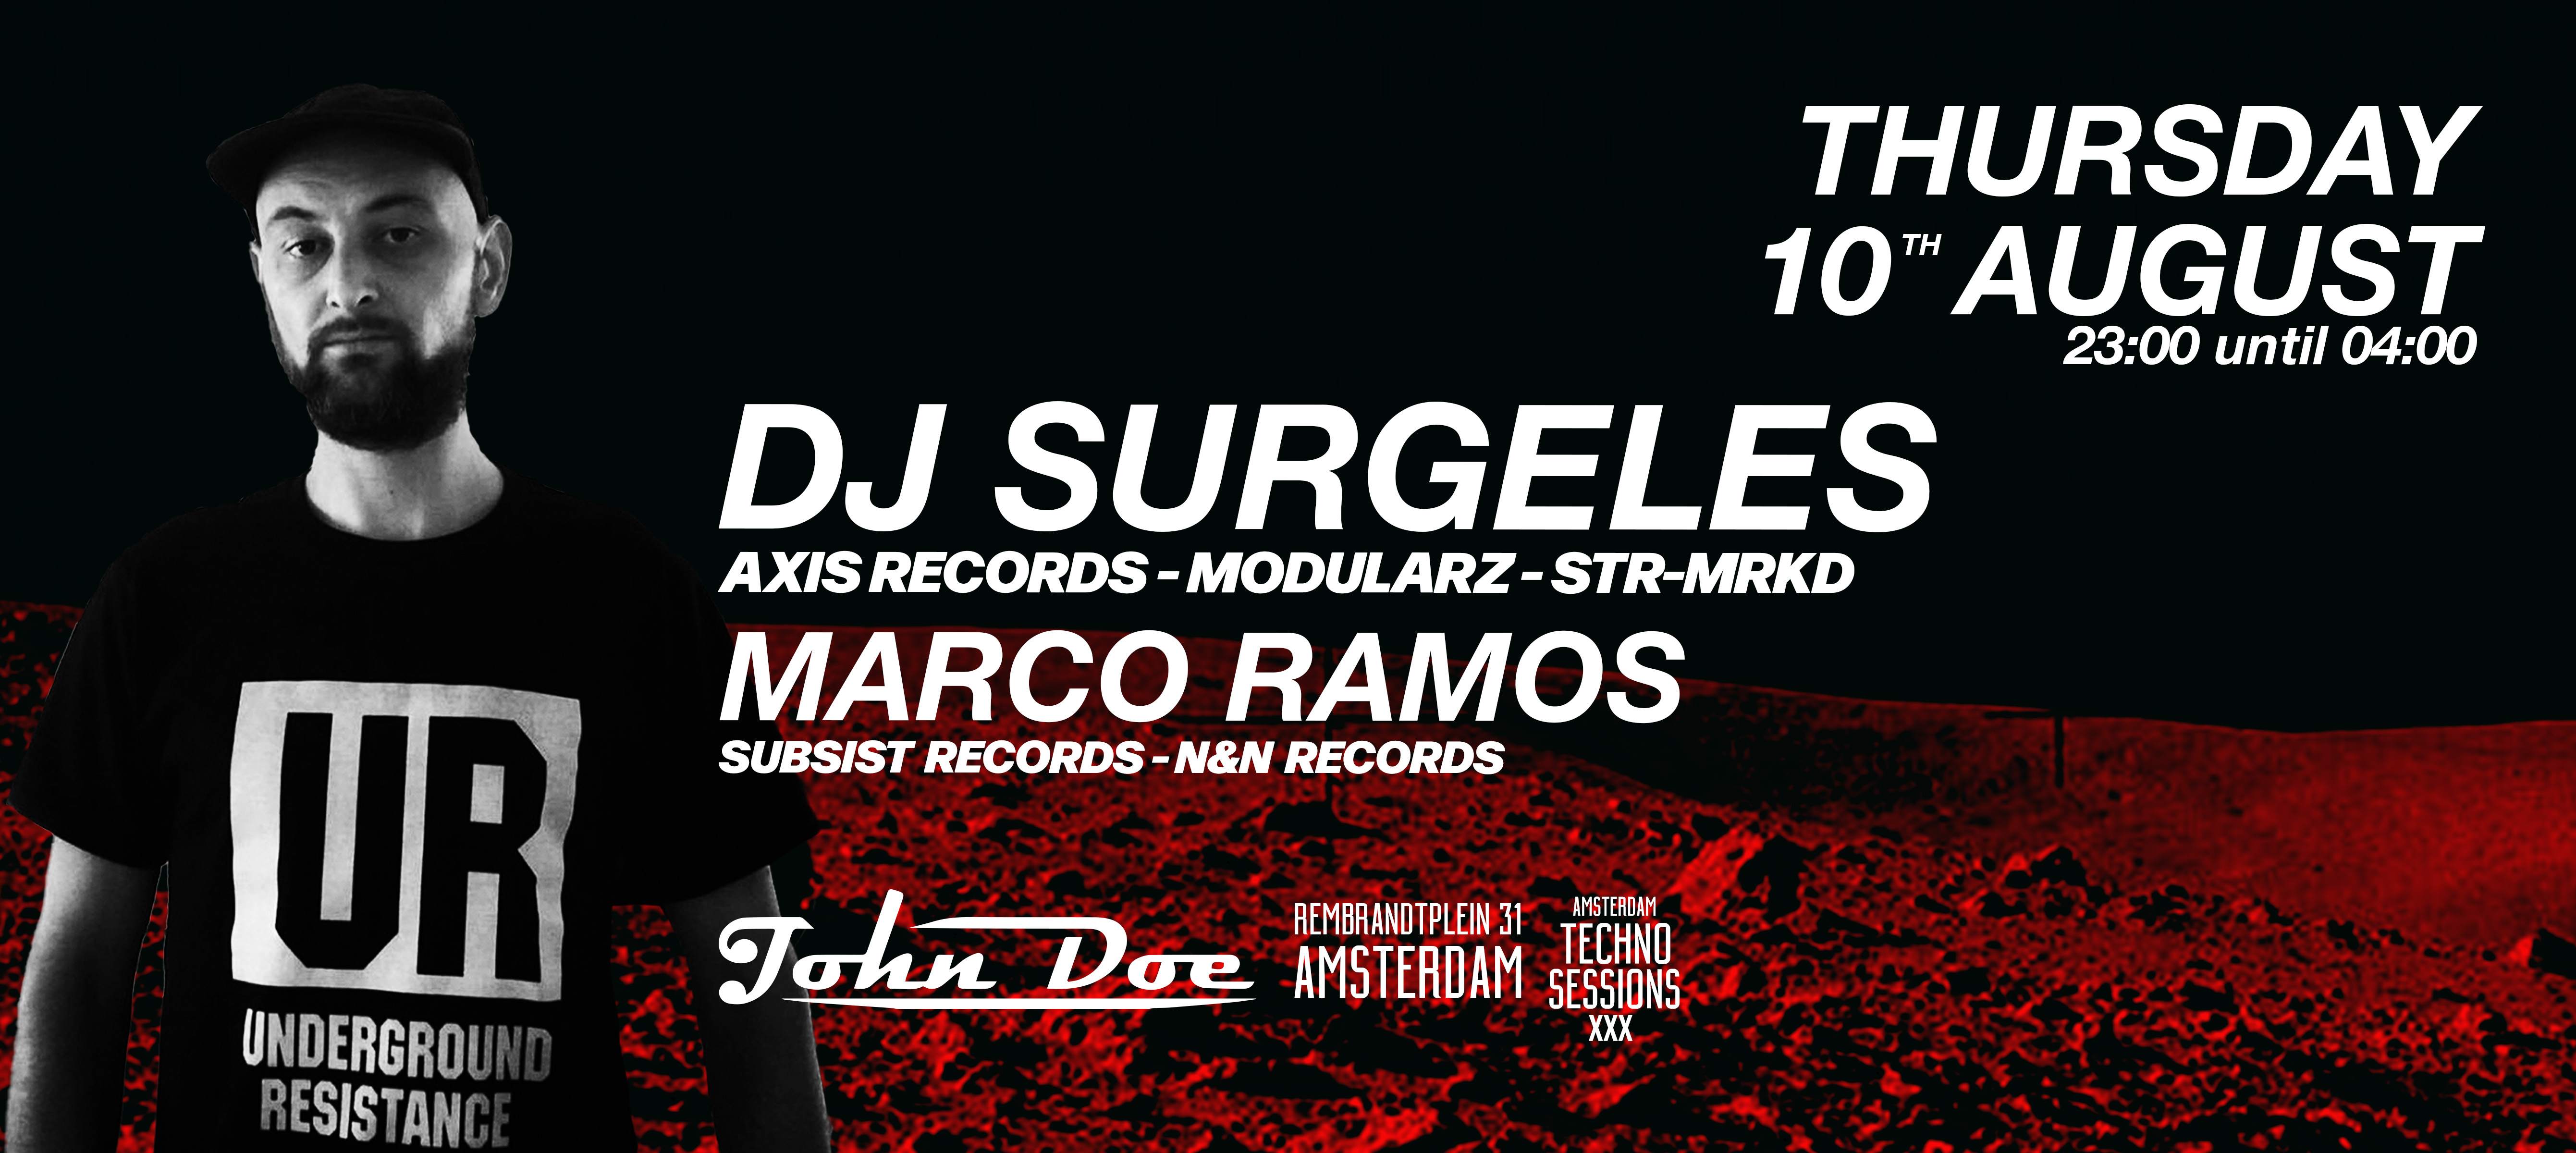 Amsterdam Techno Sessions with DJ Surgeles (Axis Records - Modularz - STR-MRKD) - フライヤー表